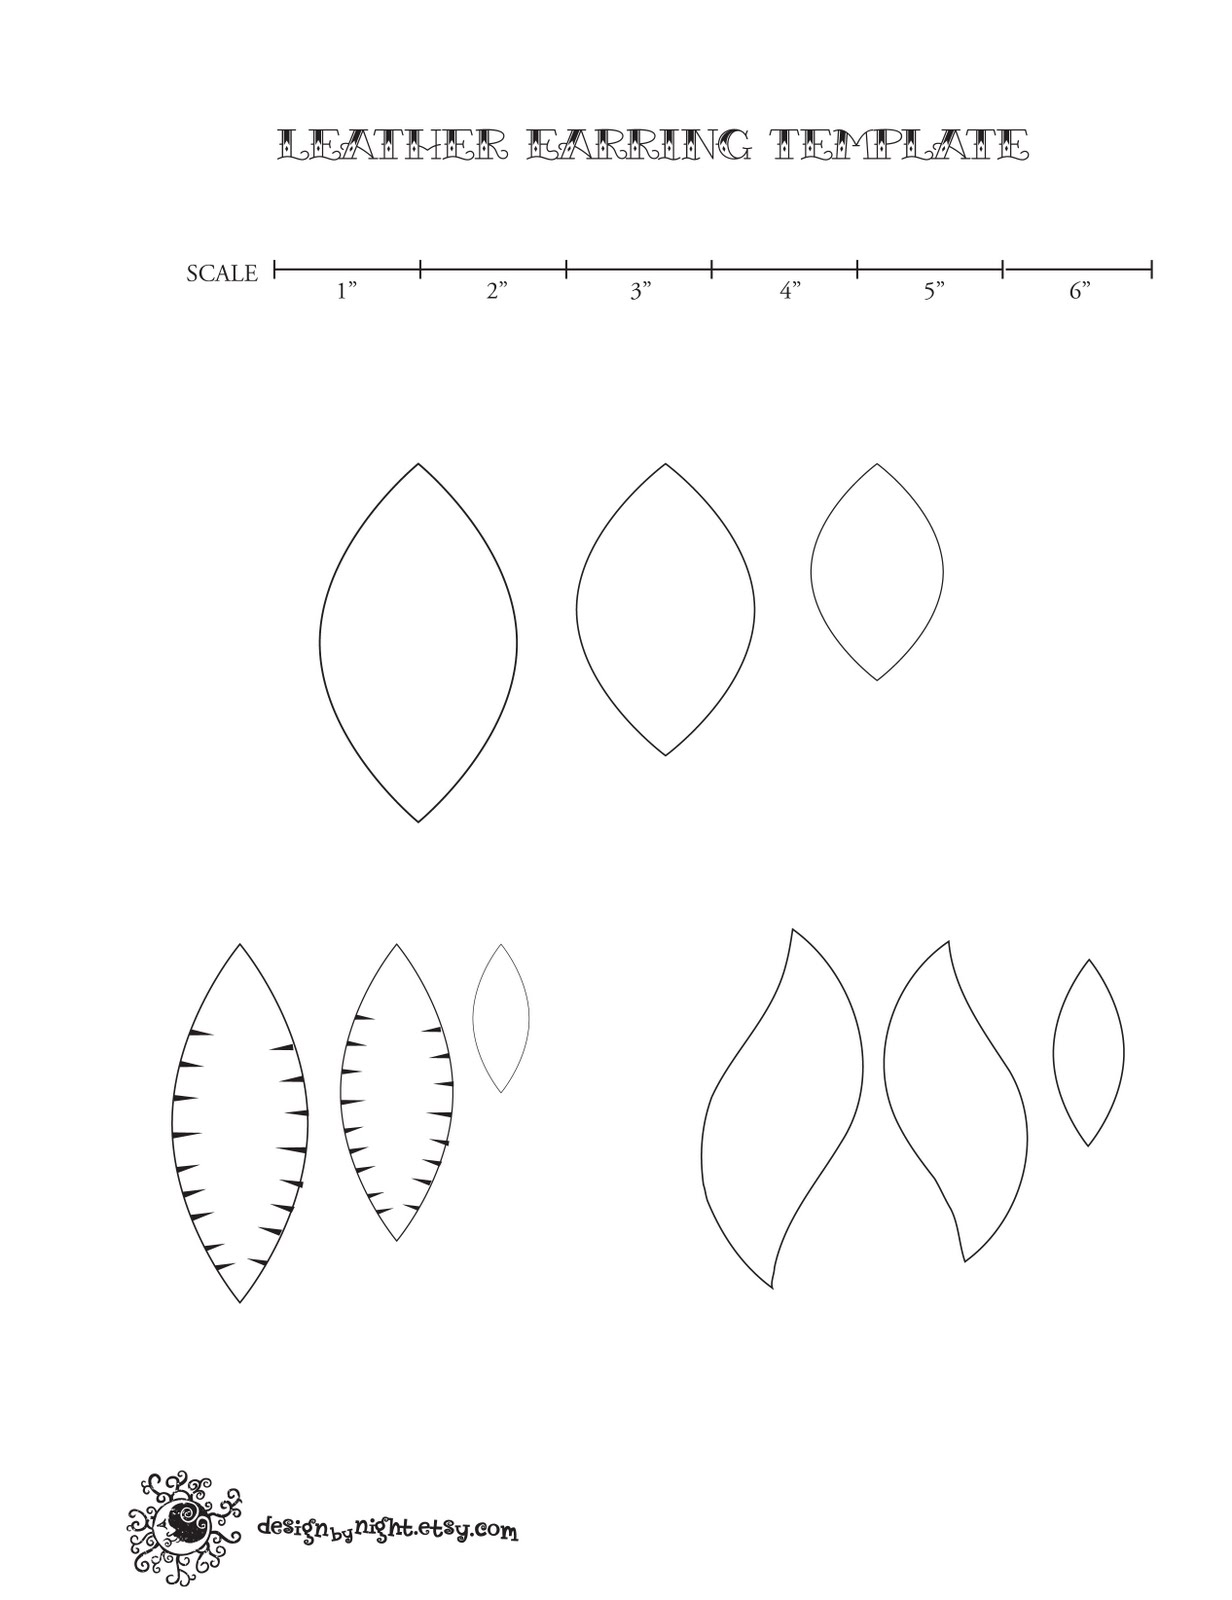 Download Free svgs for Faux Leather Earrings